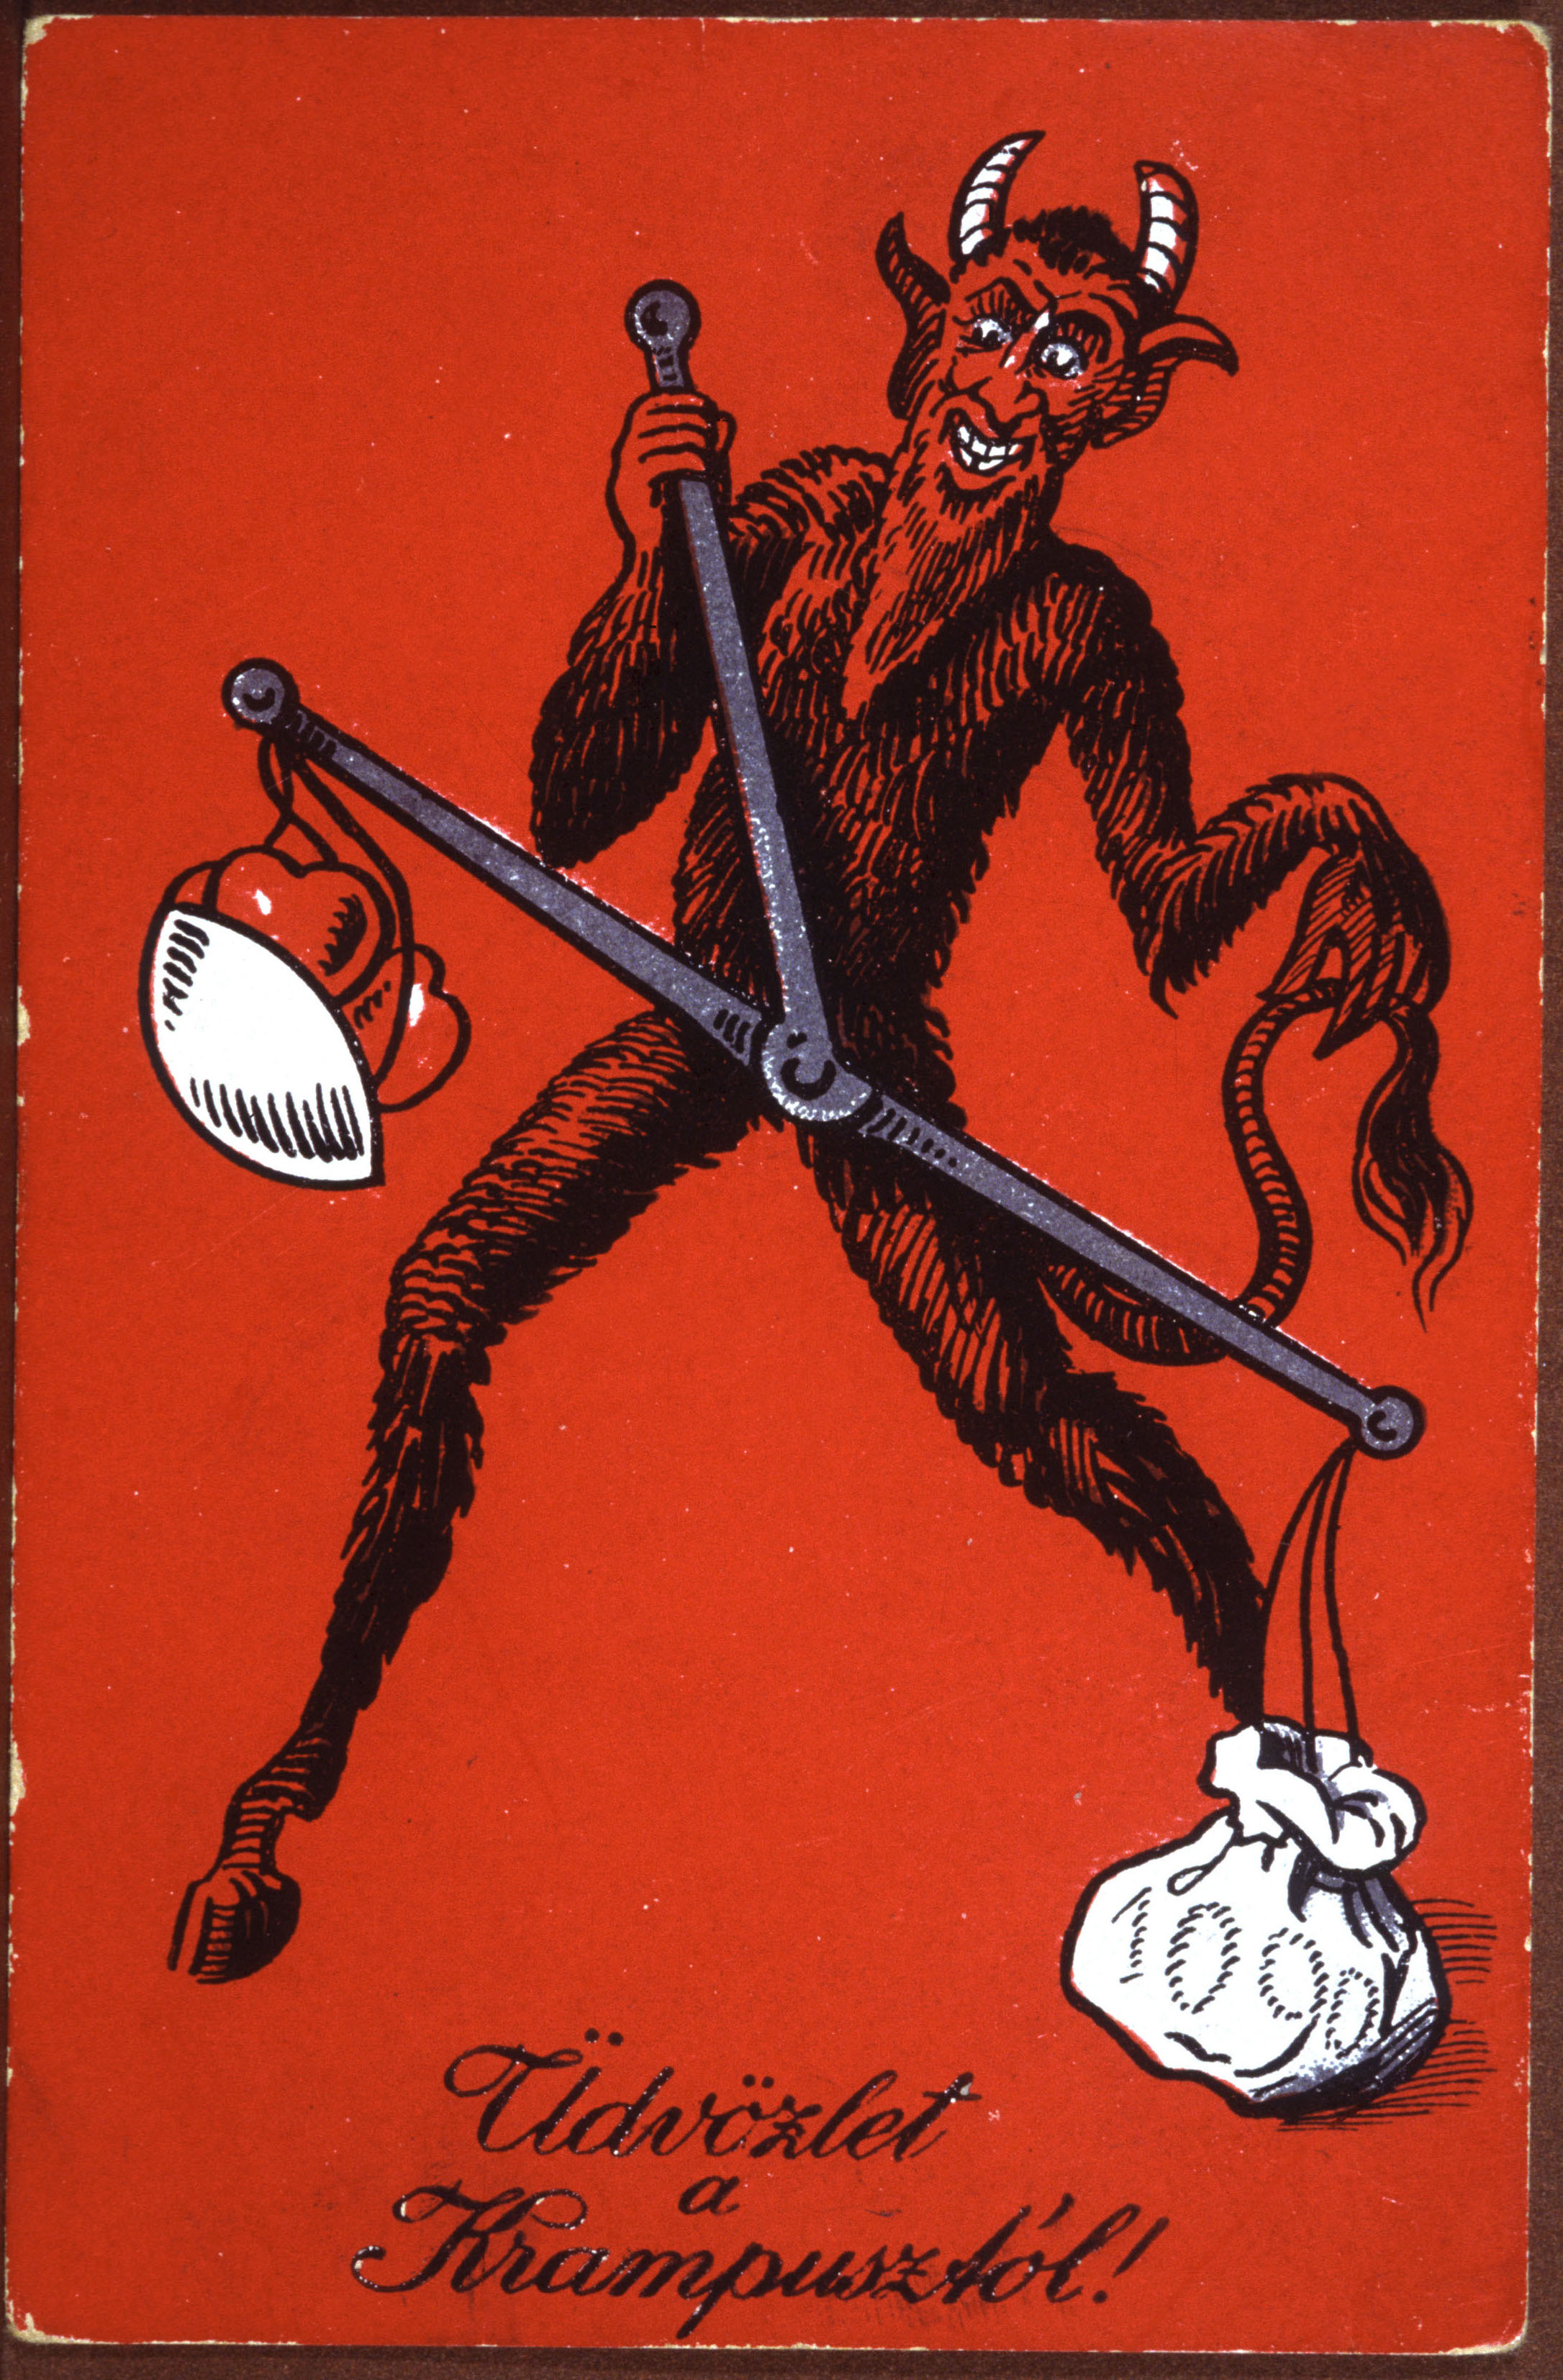 Krampus (Père Fouettard, Knecht Ruprecht, devil, traditionally evil companion of Santa Claus) weighing hearts, postcard, Hungary, early 20th century